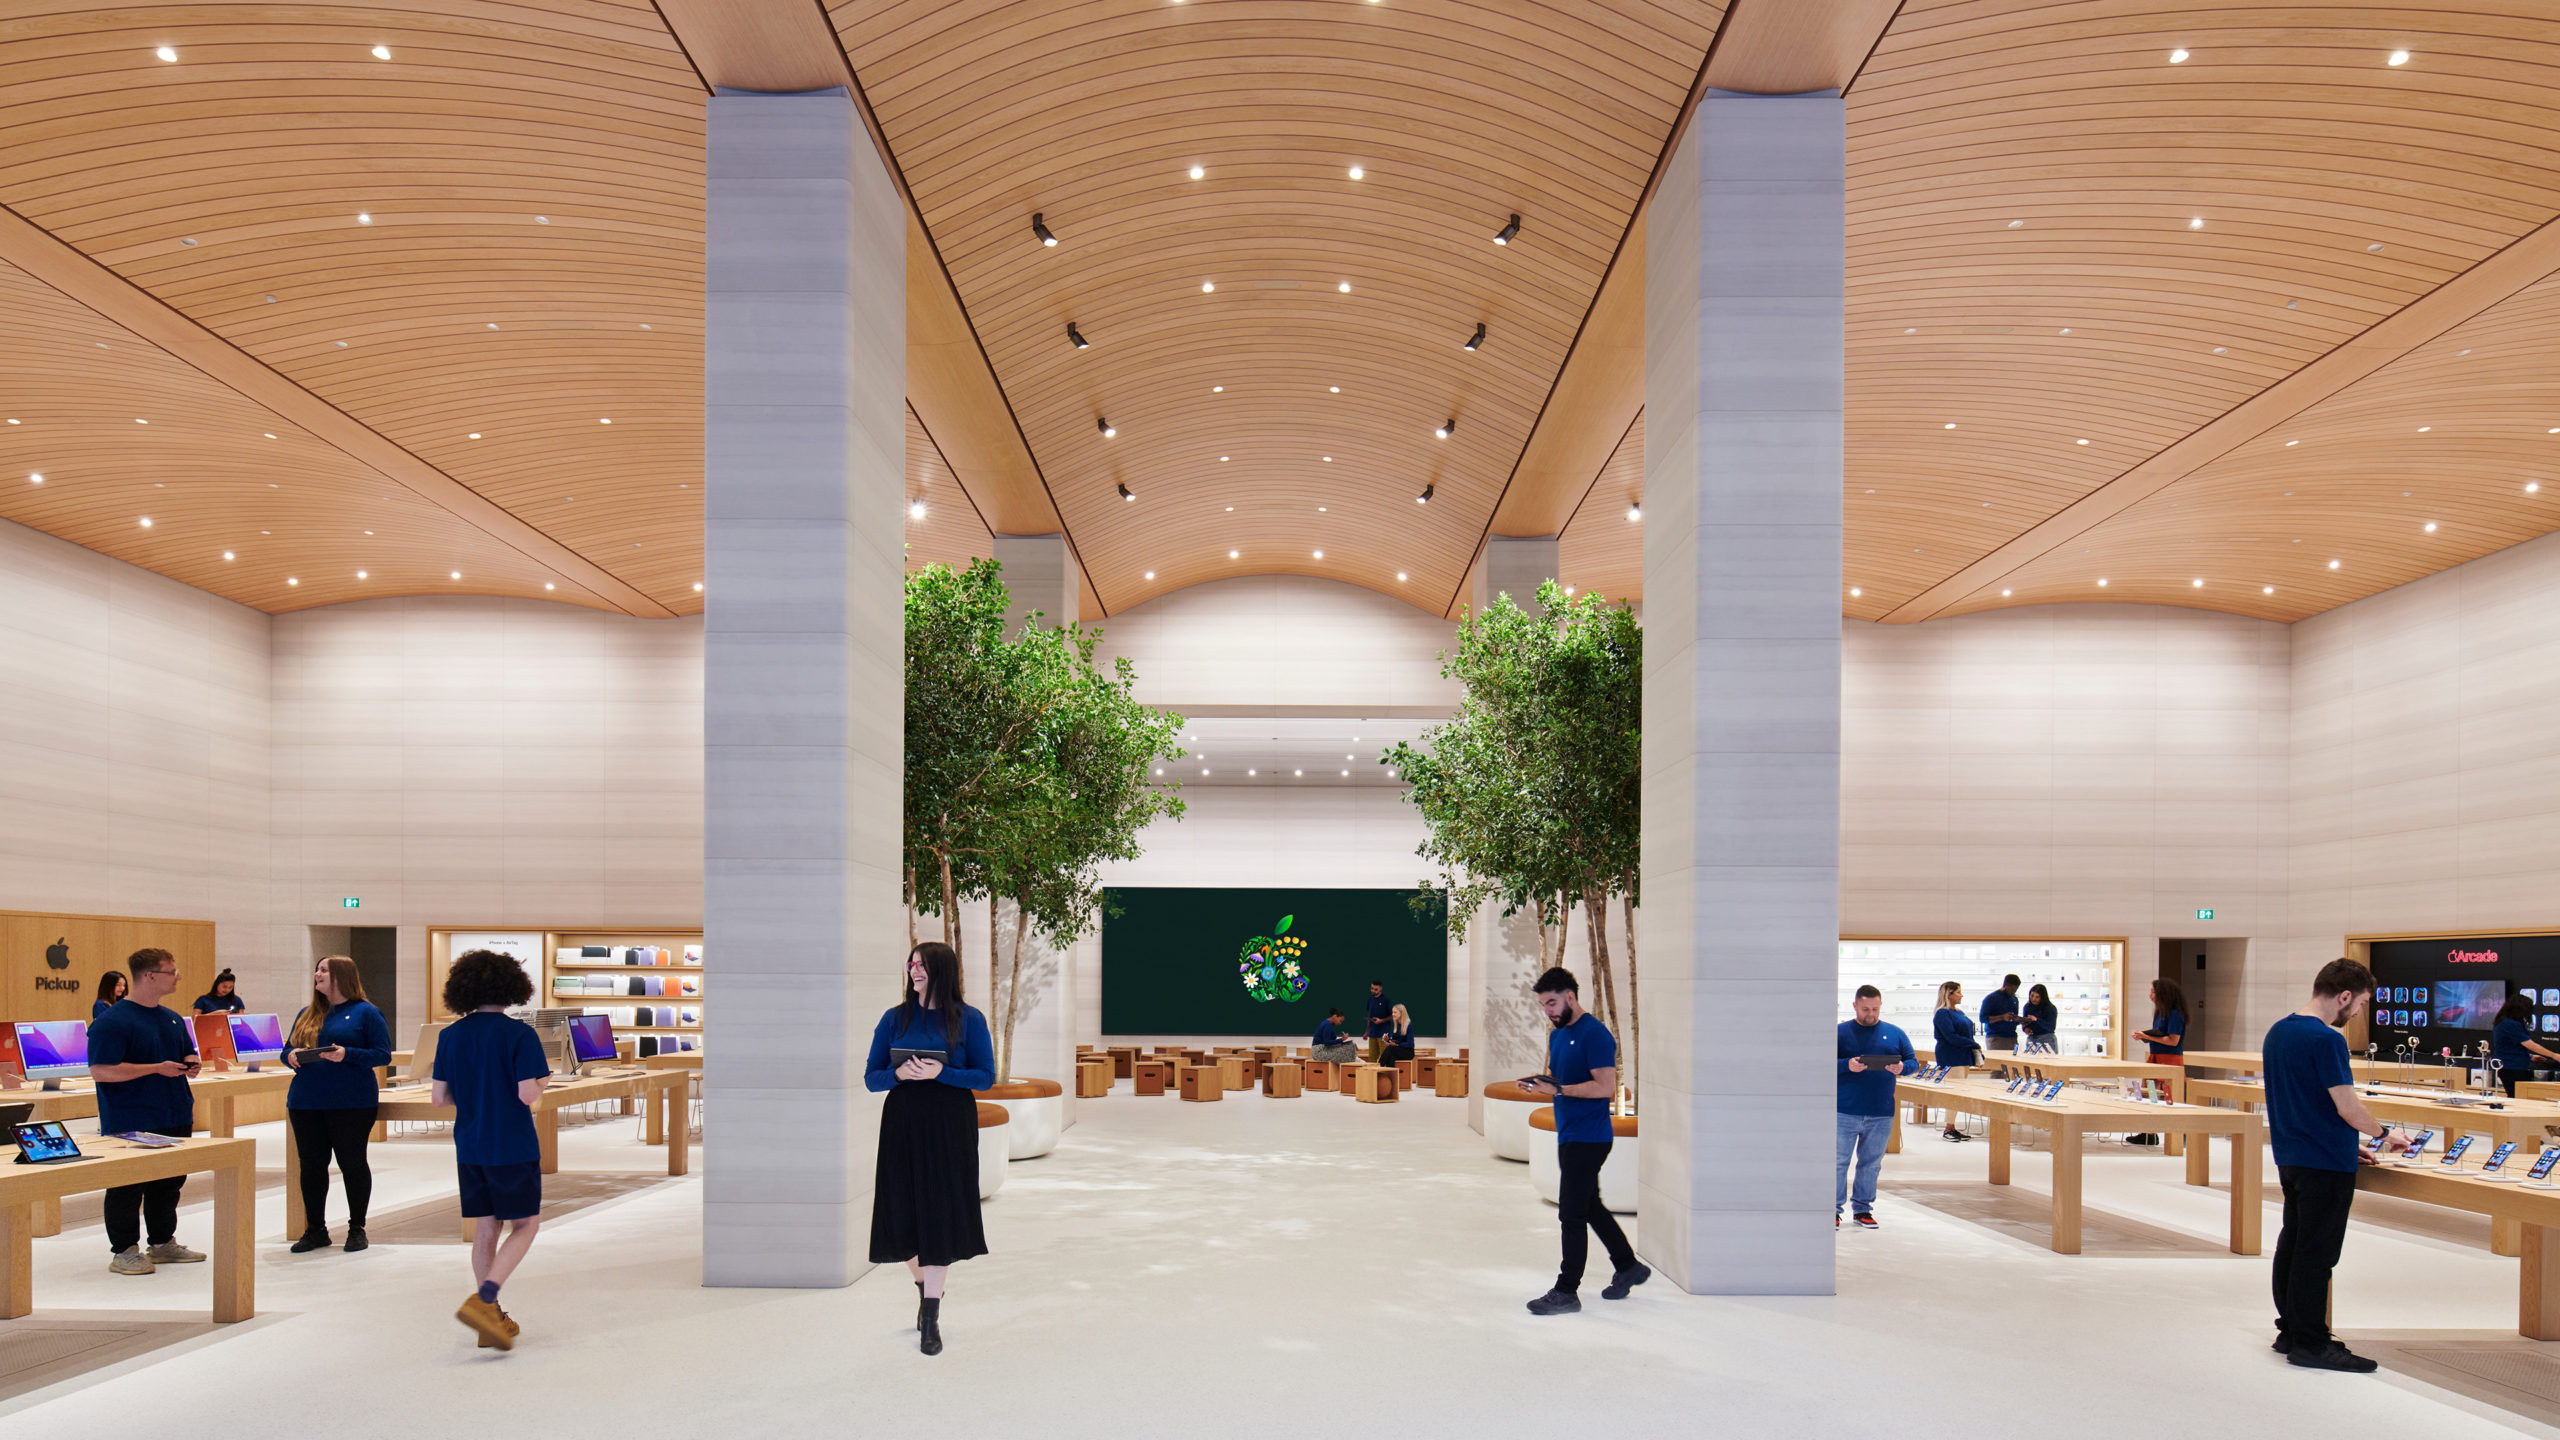 Not All Apple Stores Are the Same – Let Me Show You